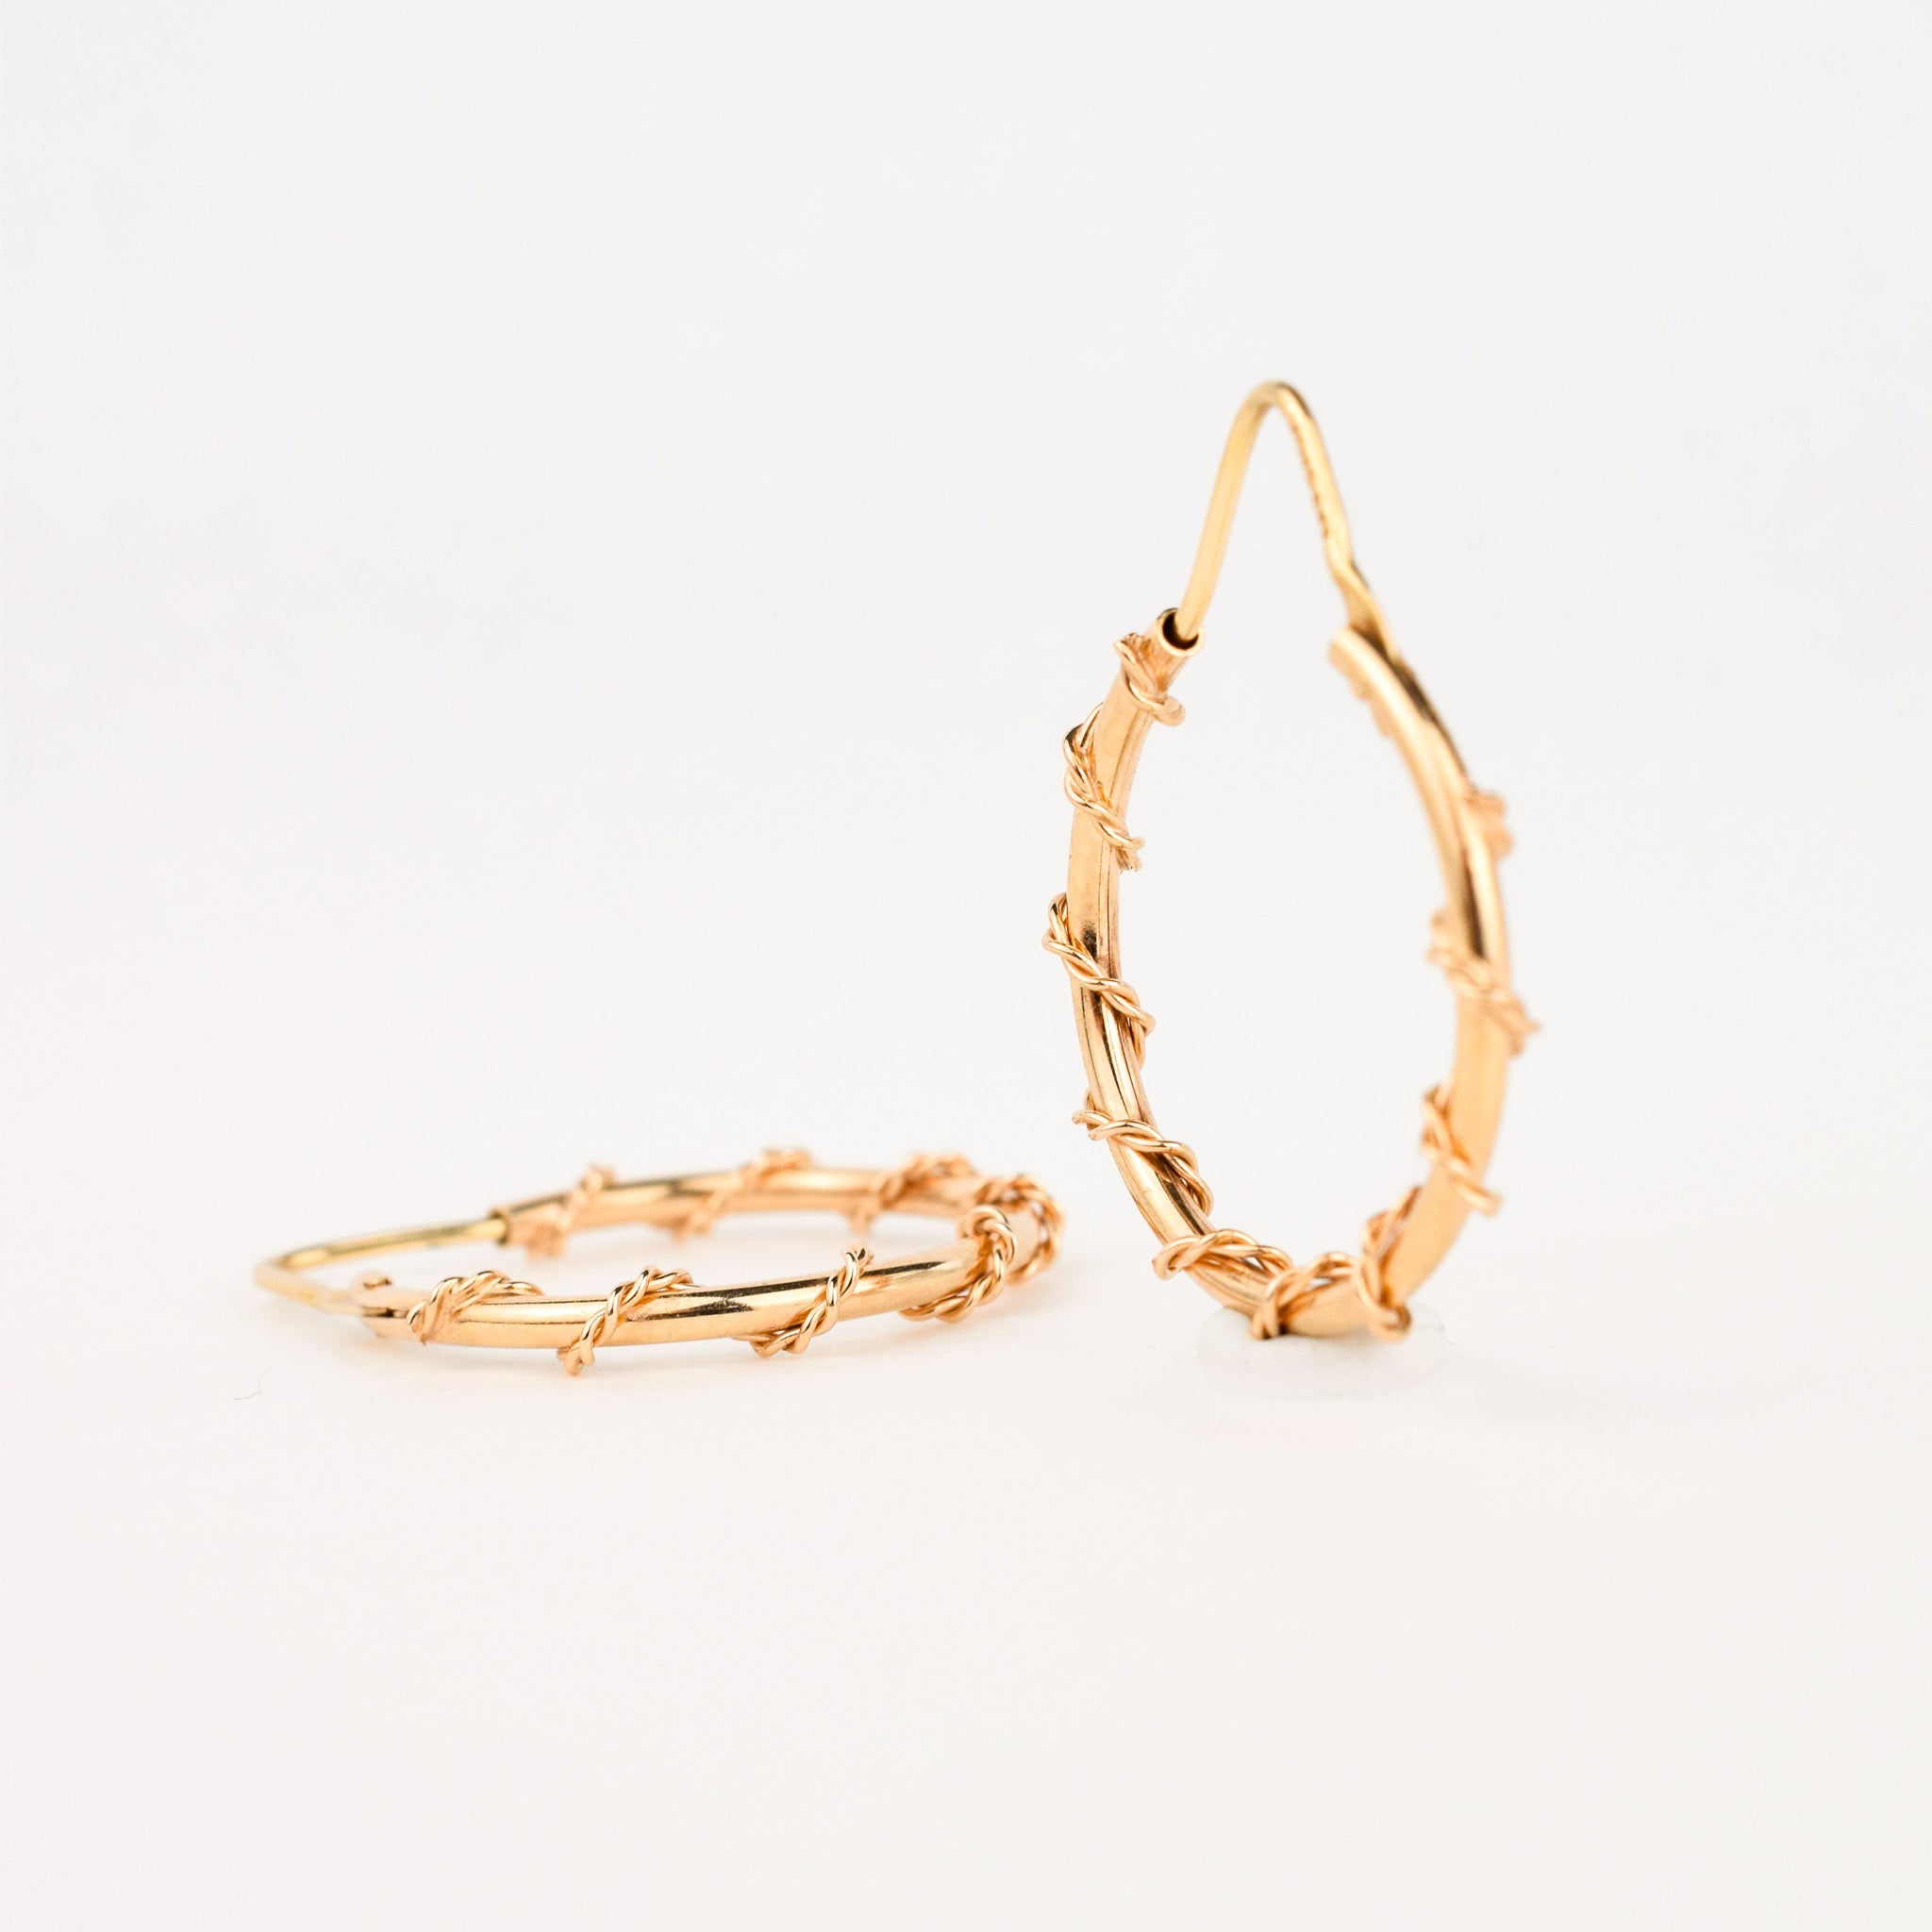 Gold Hoops with Delicate Rope Detailing